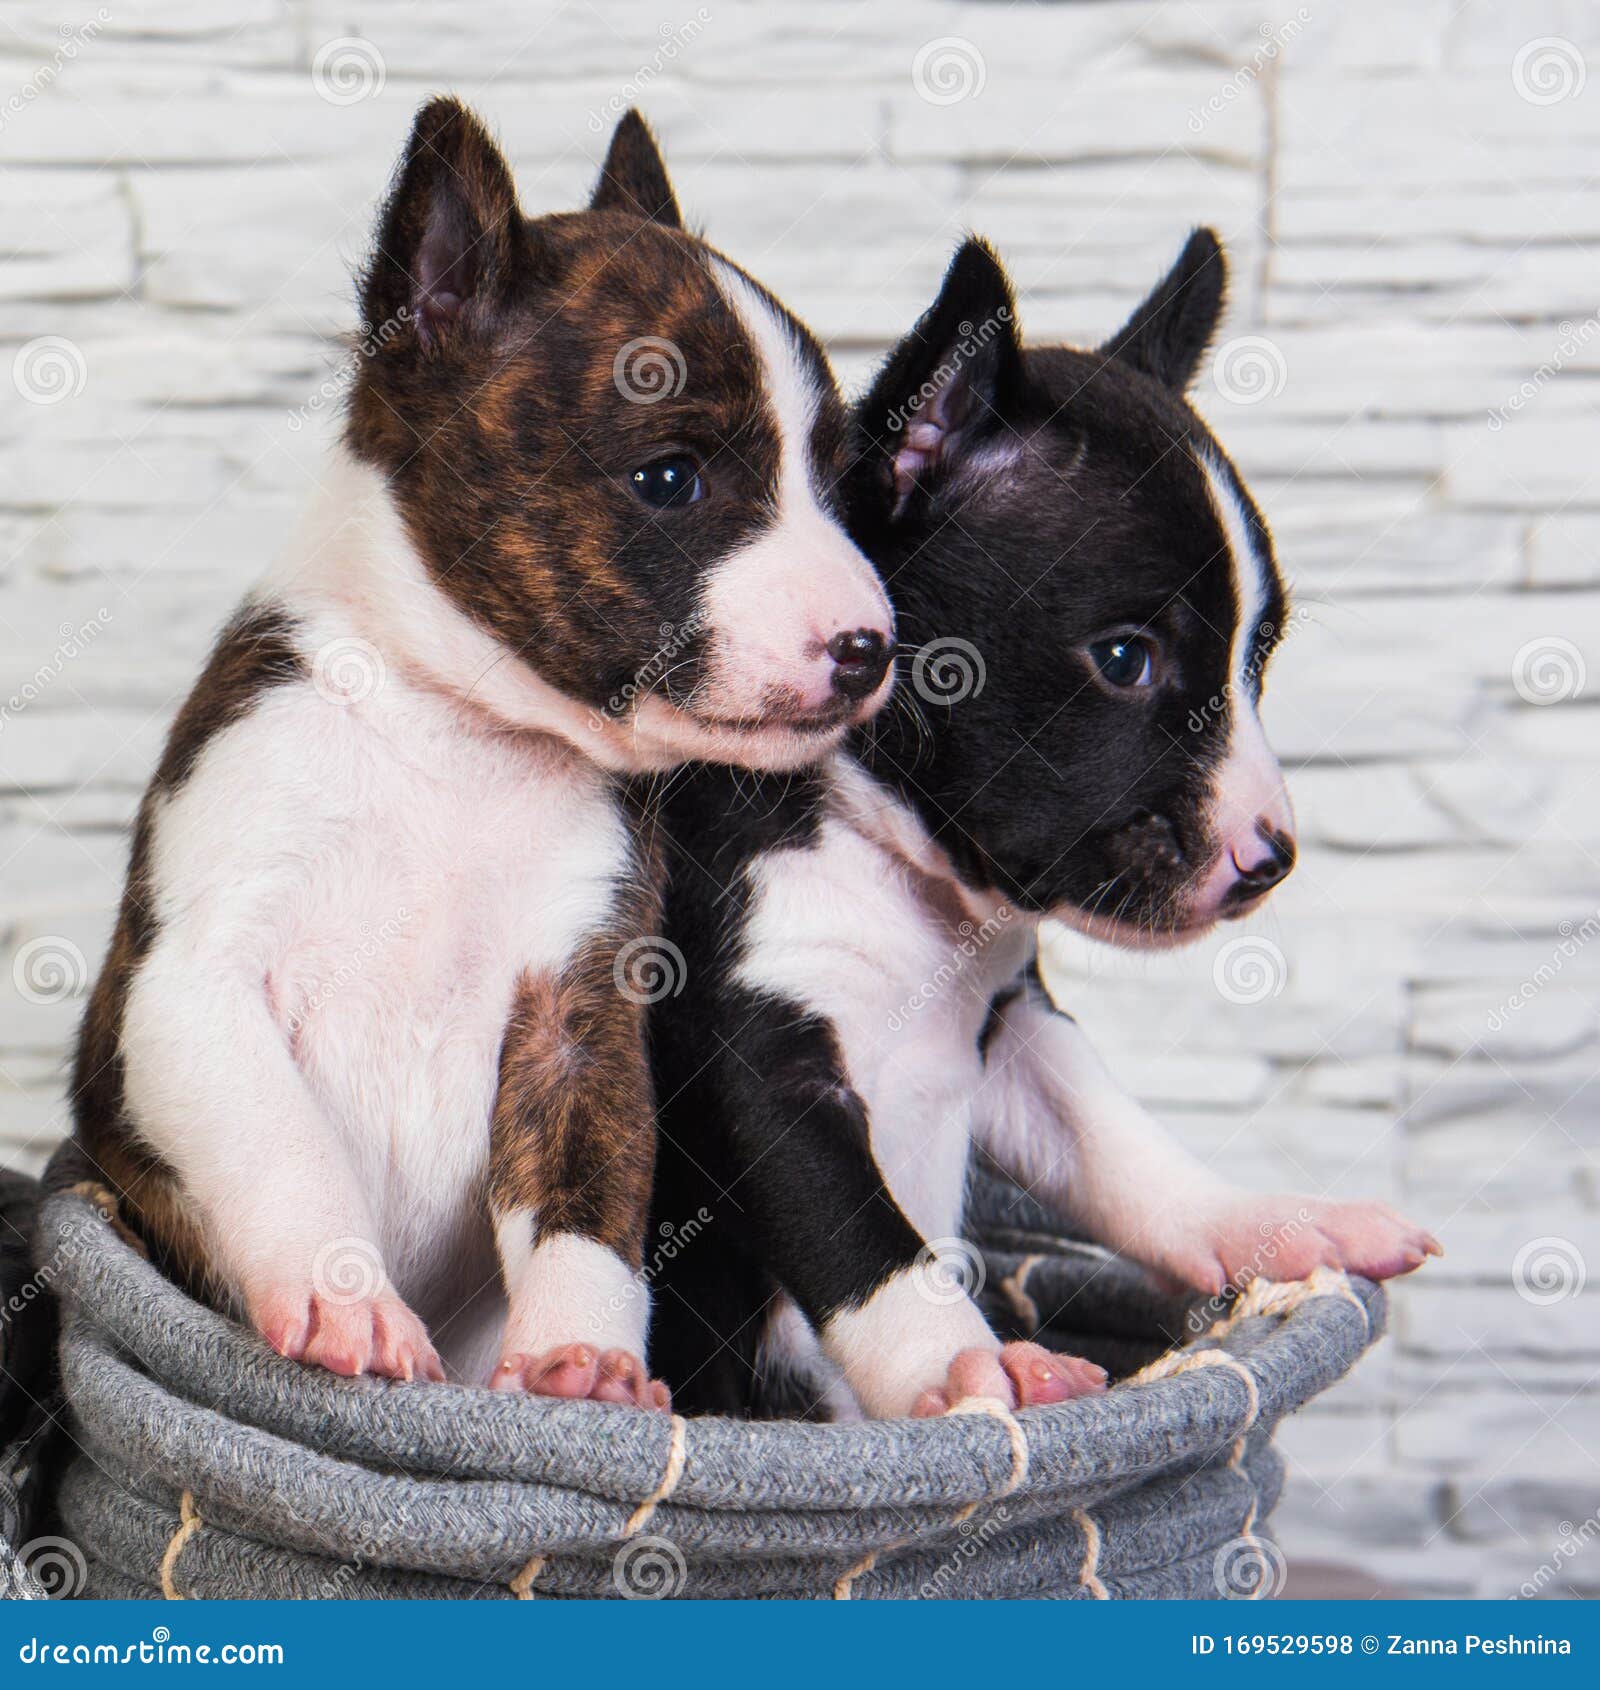 Two Funny Small Babies Basenji Puppies Dogs Stock Photo - Image of event,  breed: 169529598